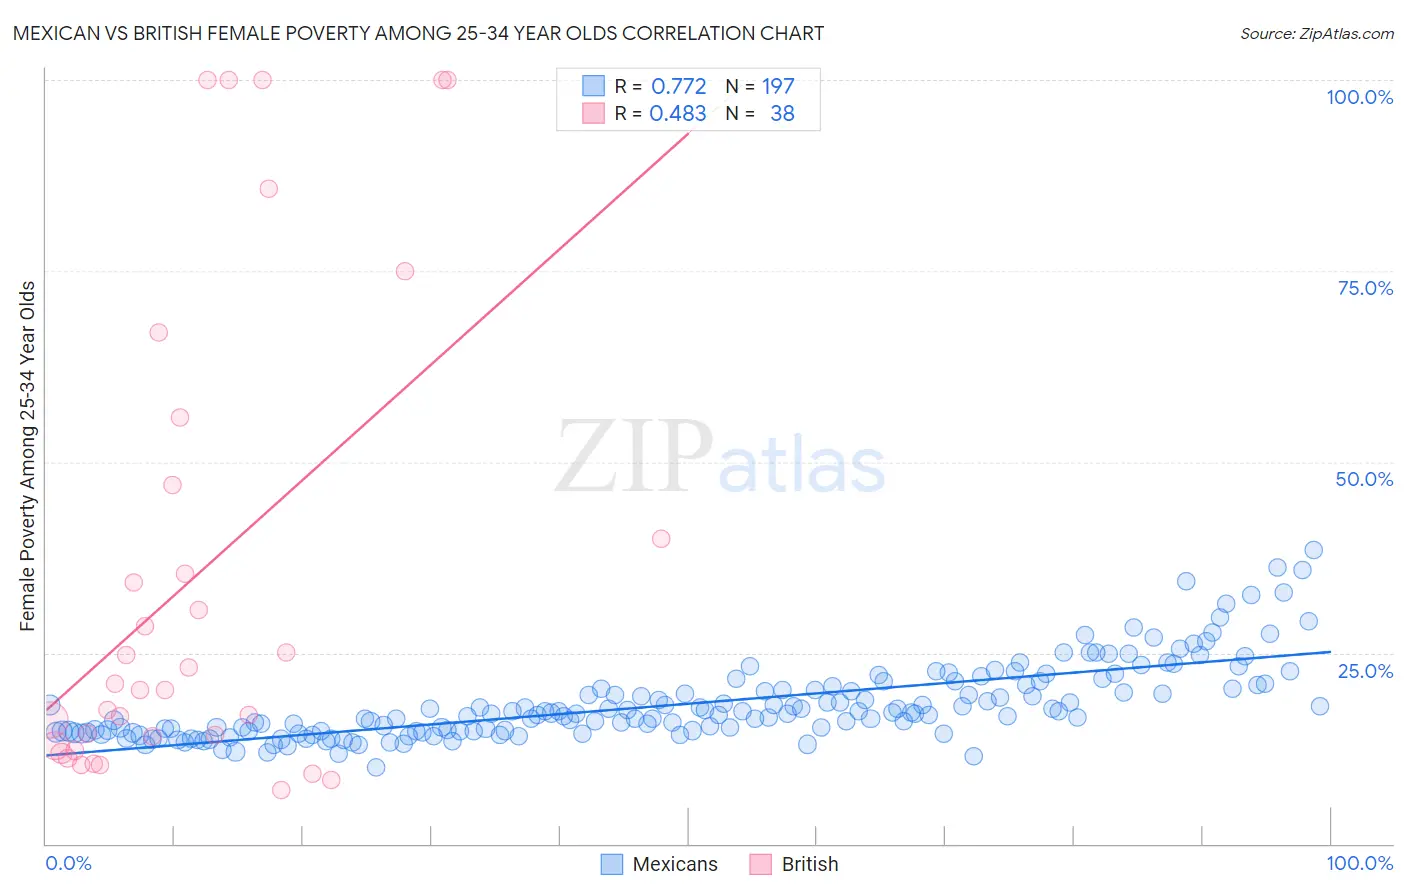 Mexican vs British Female Poverty Among 25-34 Year Olds